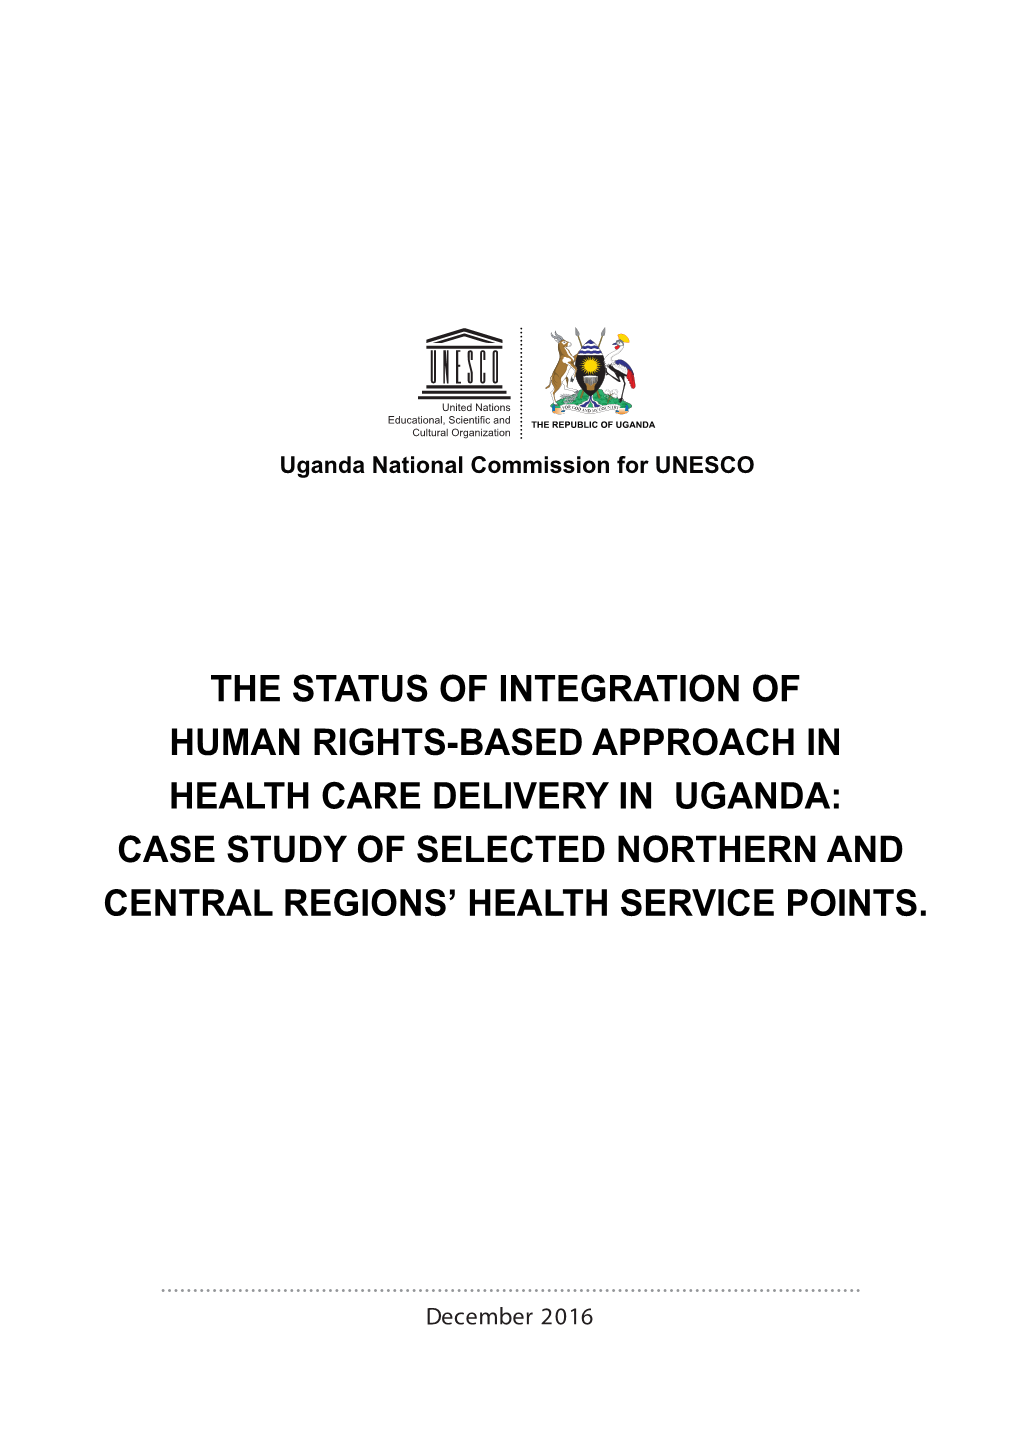 The Status of Integration of Human Rights-Based Approach in Health Care Delivery in Uganda: Case Study of Selected Northern and Central Regions’ Health Service Points